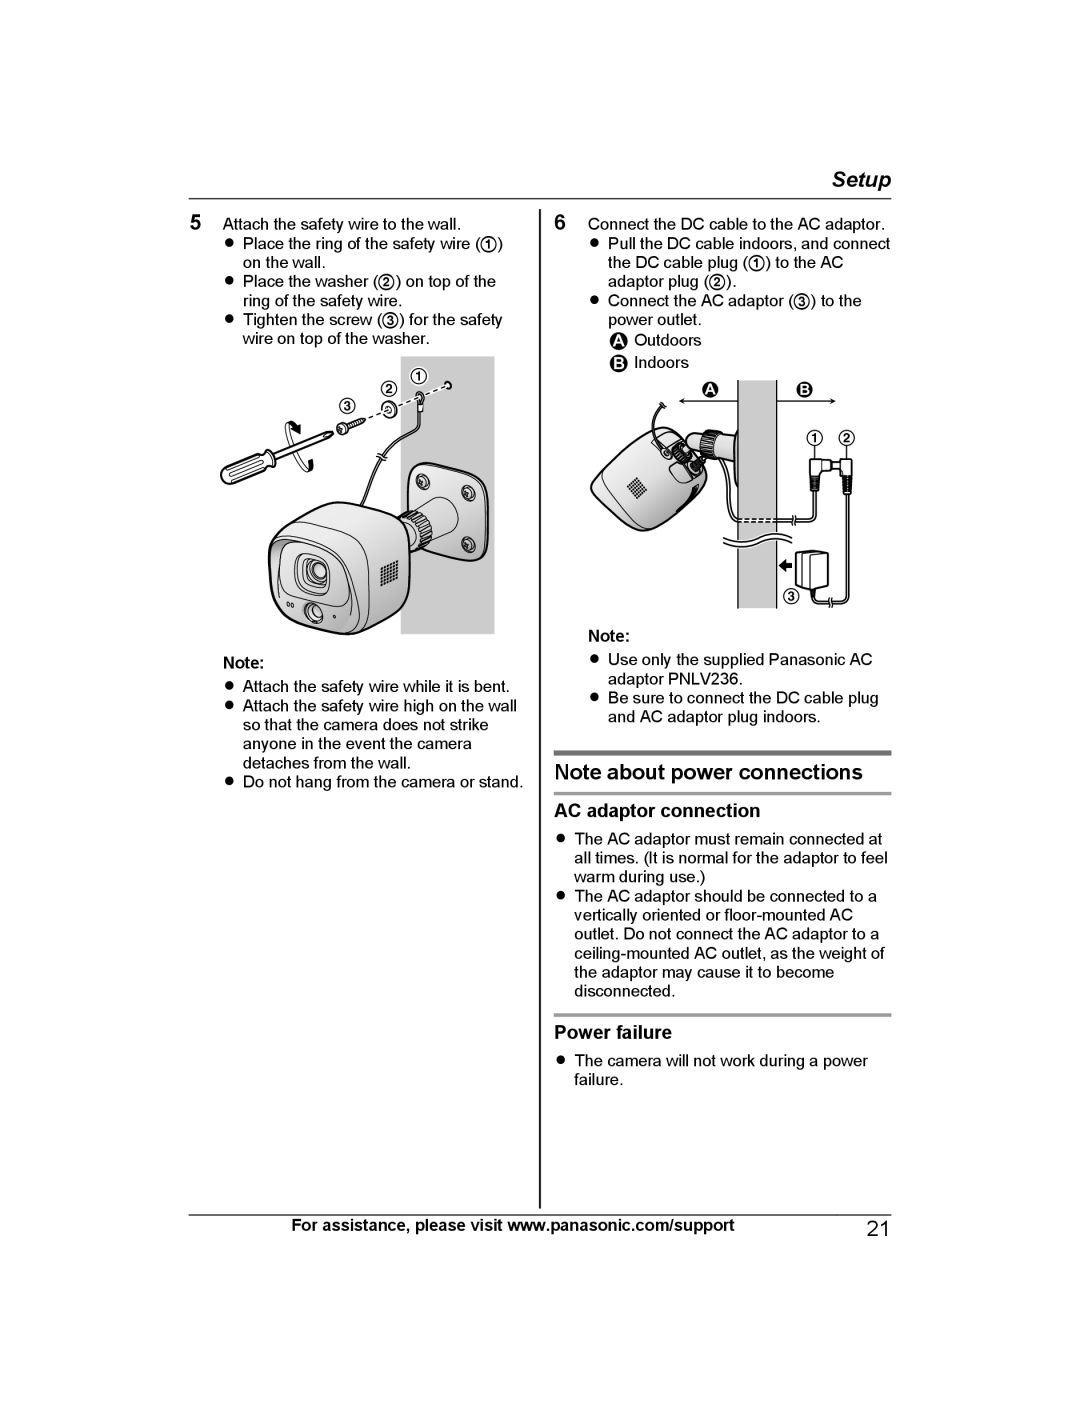 Panasonic KX-HNC600 manual Note about power connections, Setup, AC adaptor connection, Power failure 